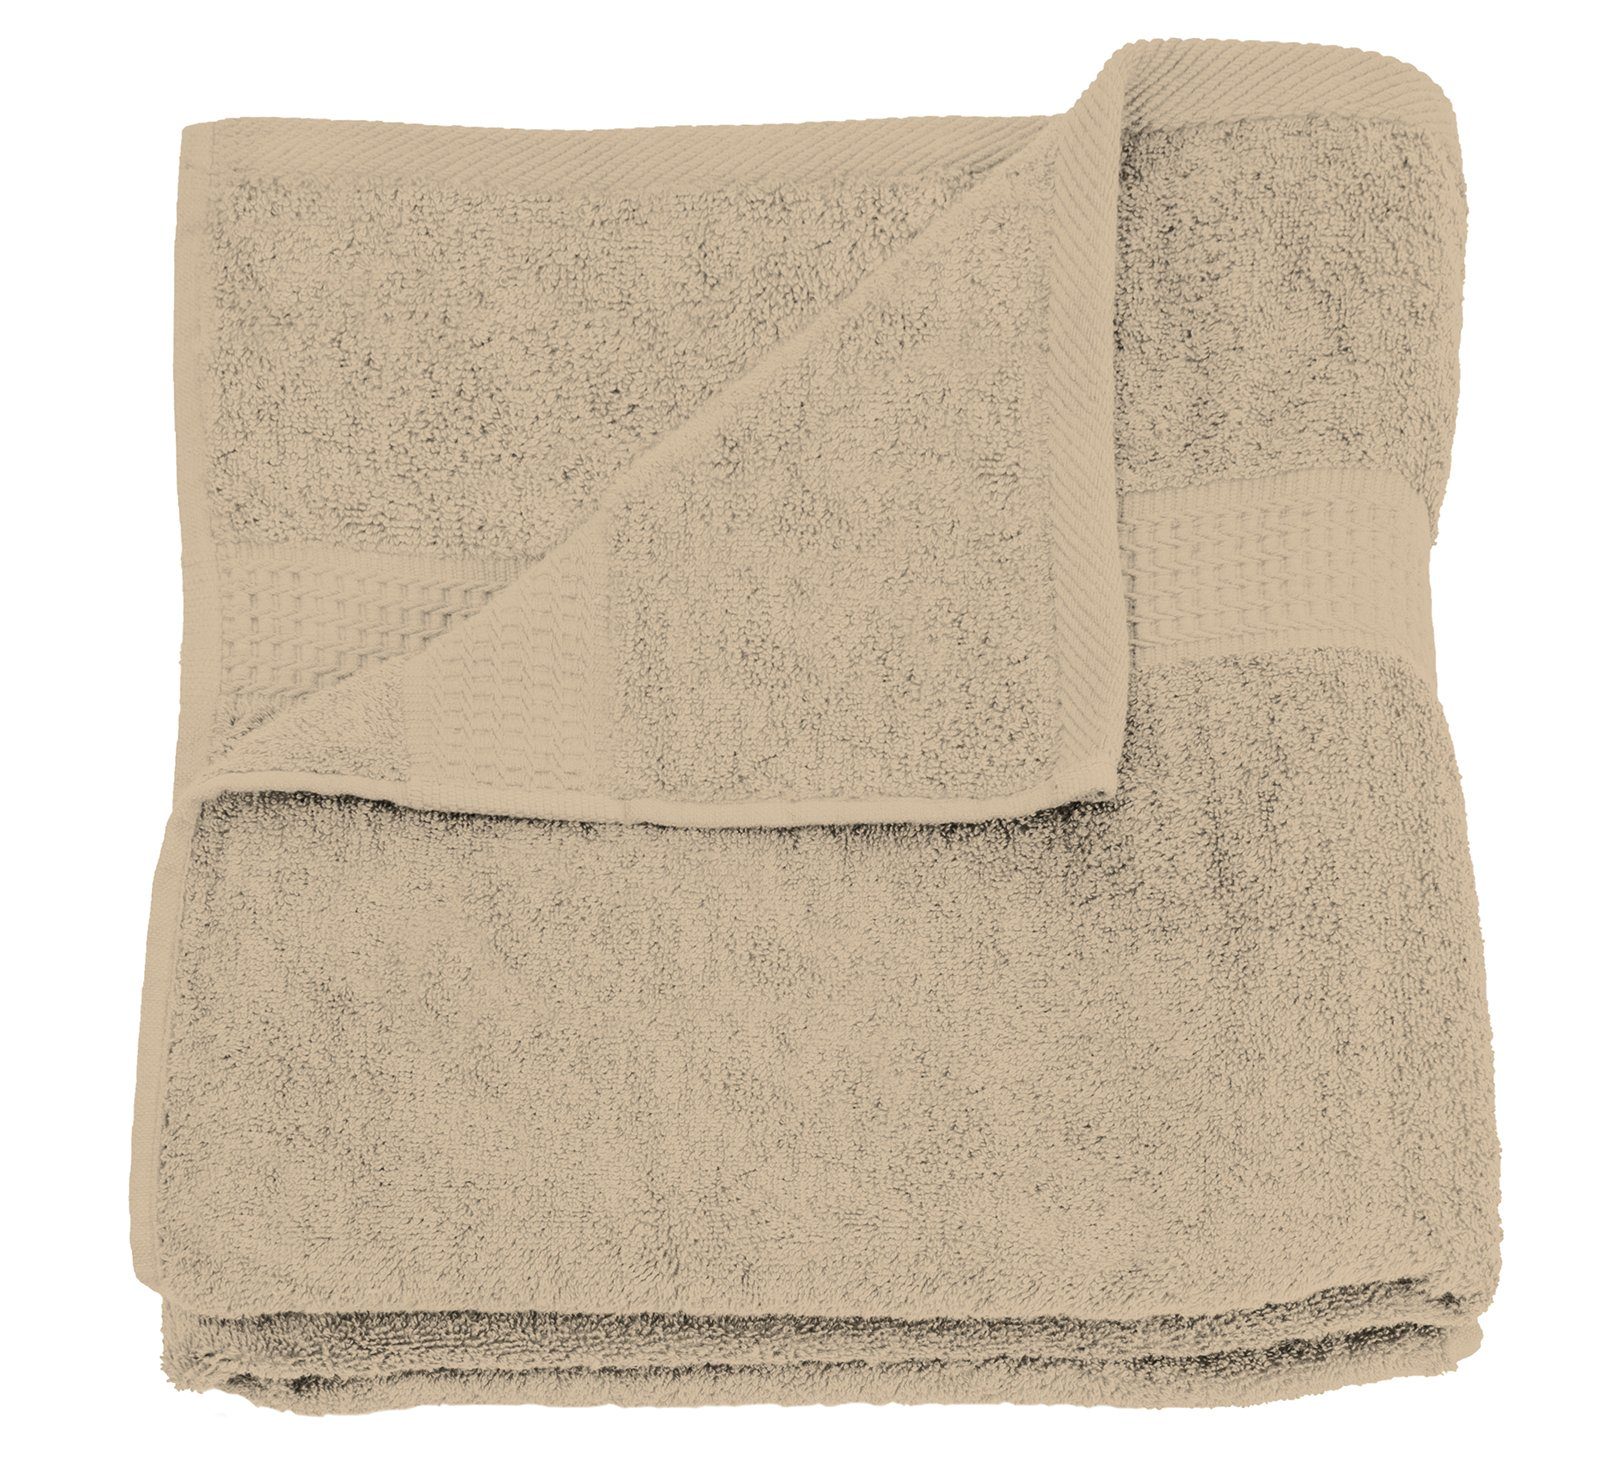 One (1-St), Royal, beige mit Duschtuch saugfähig Home Bordüre, Frottee